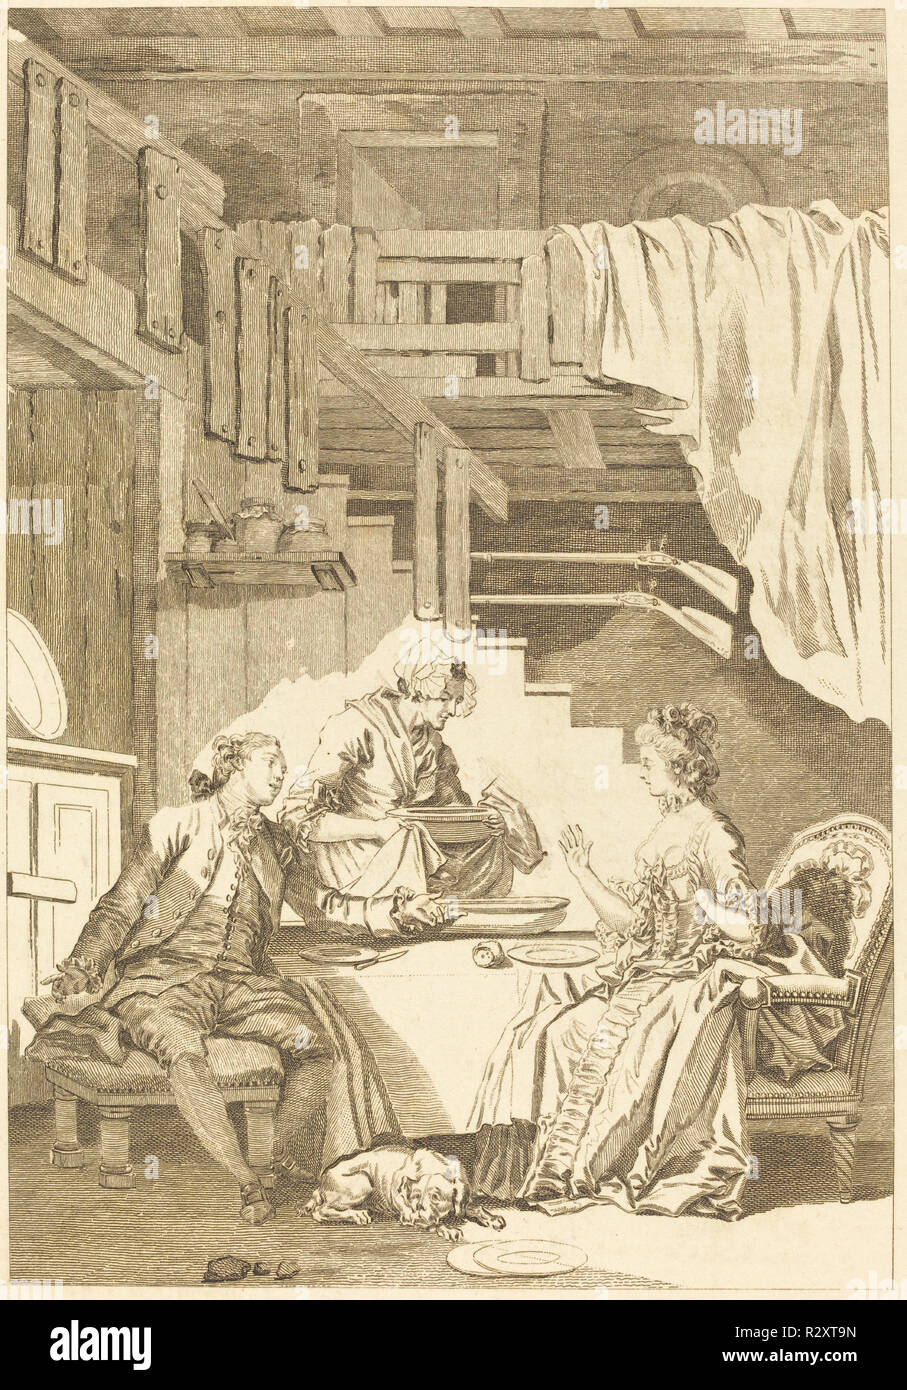 Le faucon. Medium: etching. Museum: National Gallery of Art, Washington DC. Author: Jean Dambrun and Jean-Baptiste Tilliard after Jean-Honoré Fragonard. After Jean Honoré Fragonard. Jean-Baptiste Tilliard. Stock Photo